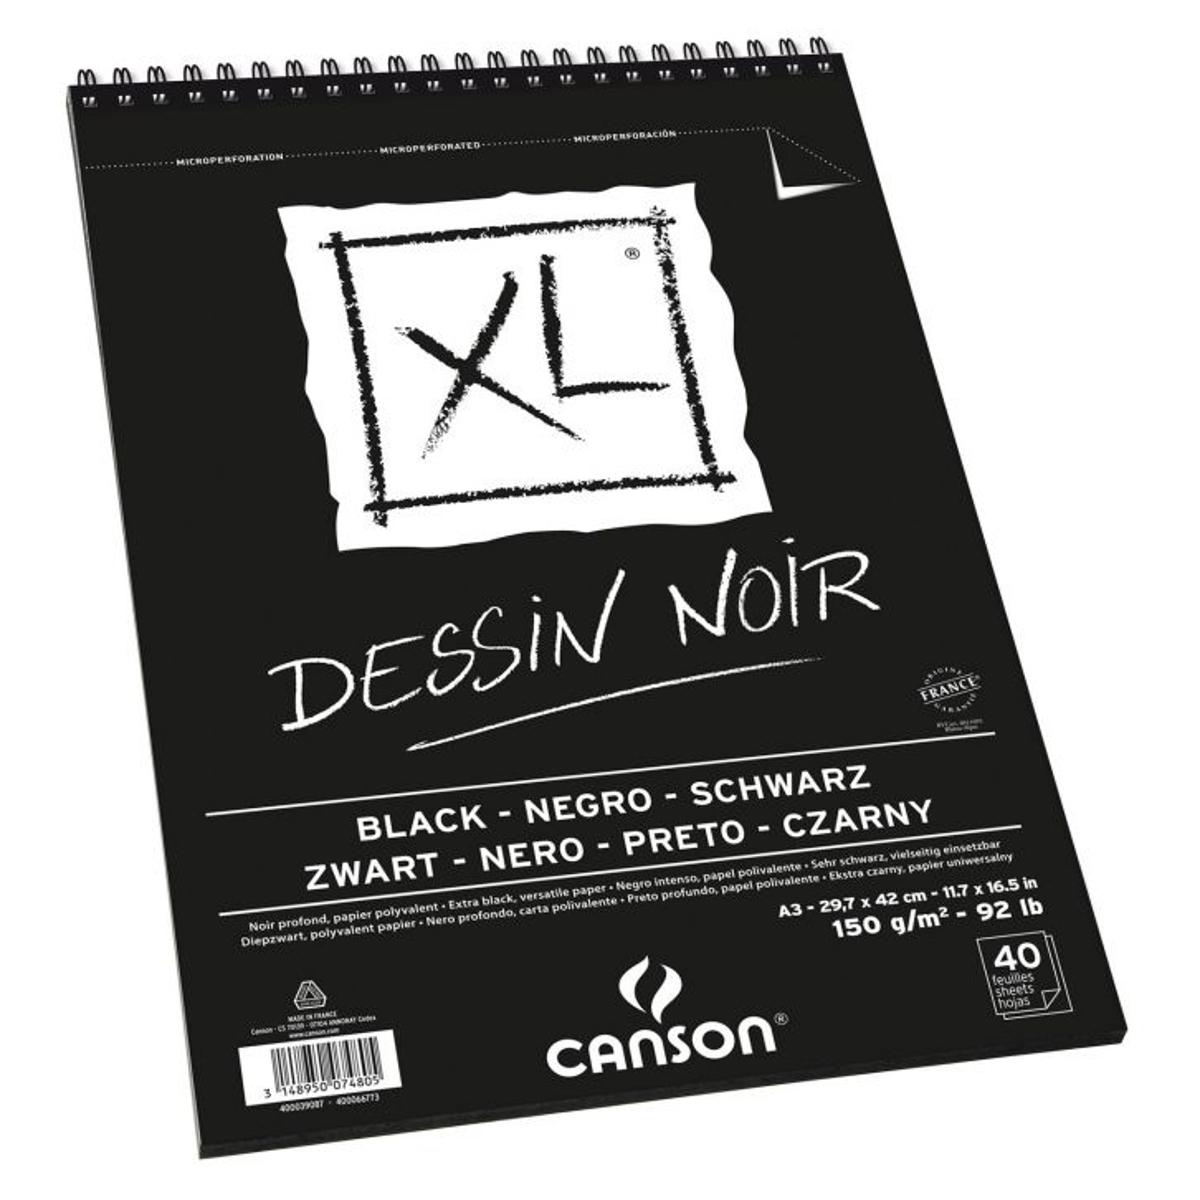 Canson XL Bristol Sketch Pad A4 made in France